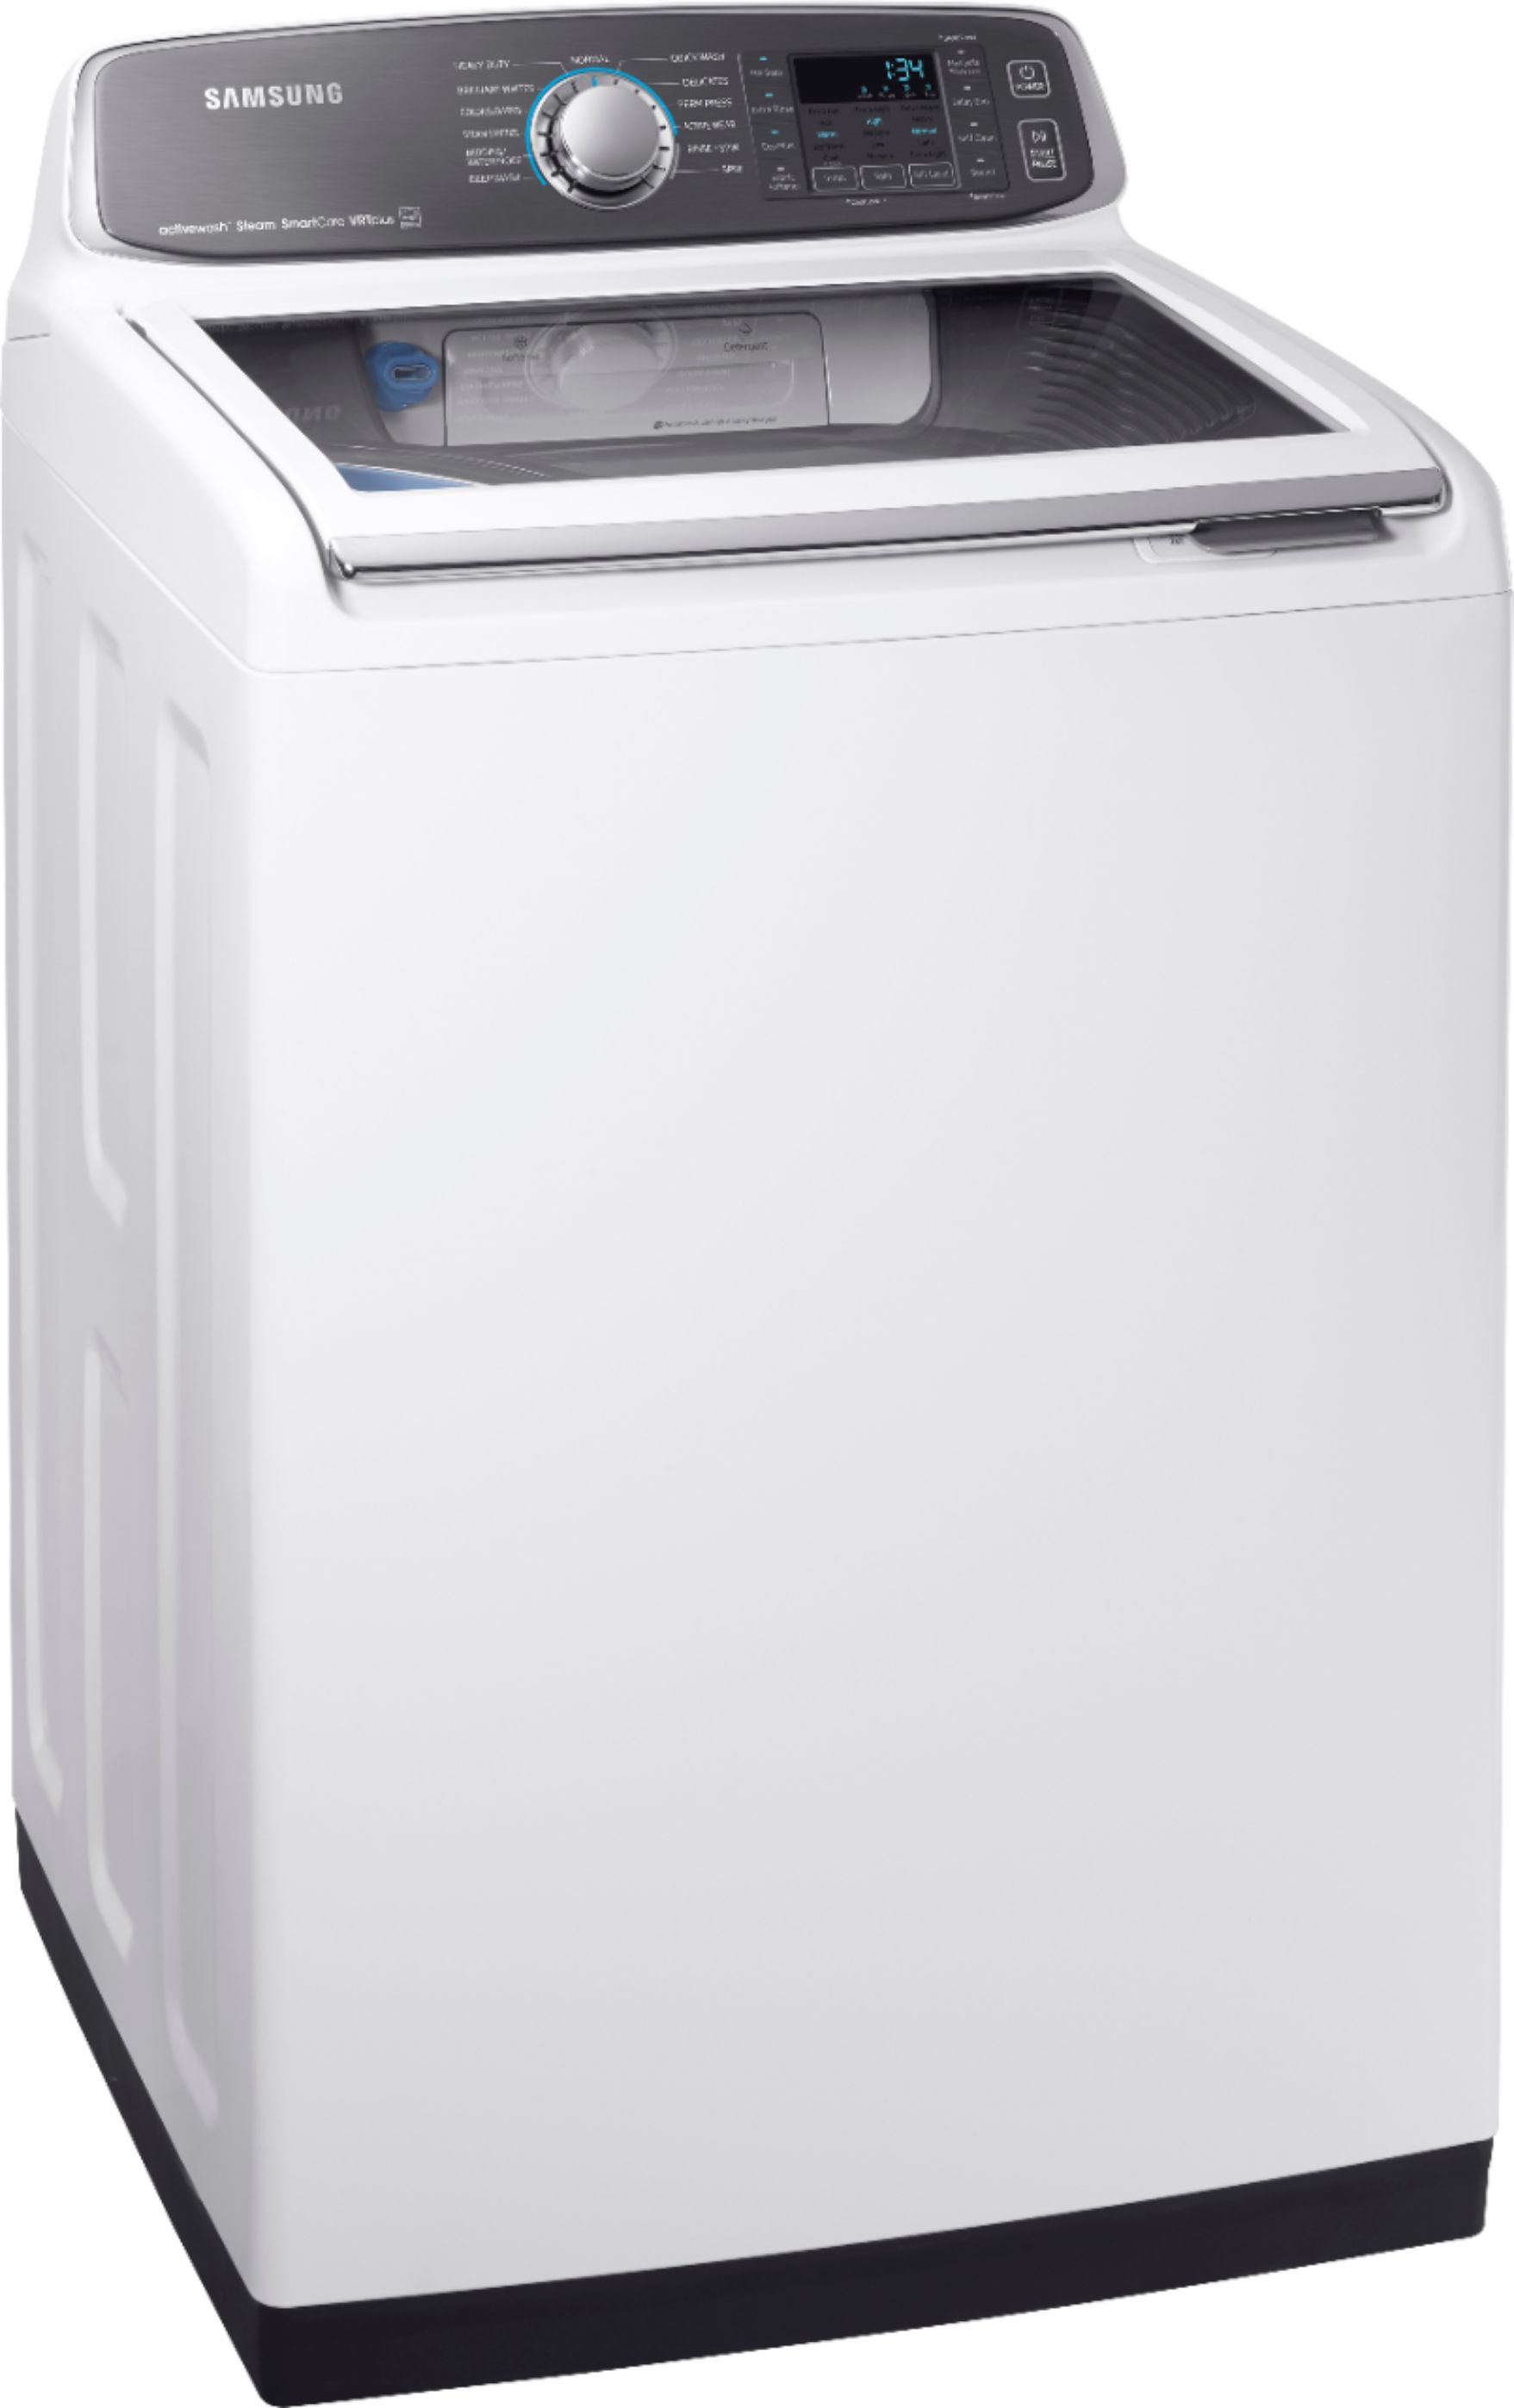 Angle View: Samsung - 5.2 Cu. Ft. High Efficiency Top Load Washer with Activewash - White